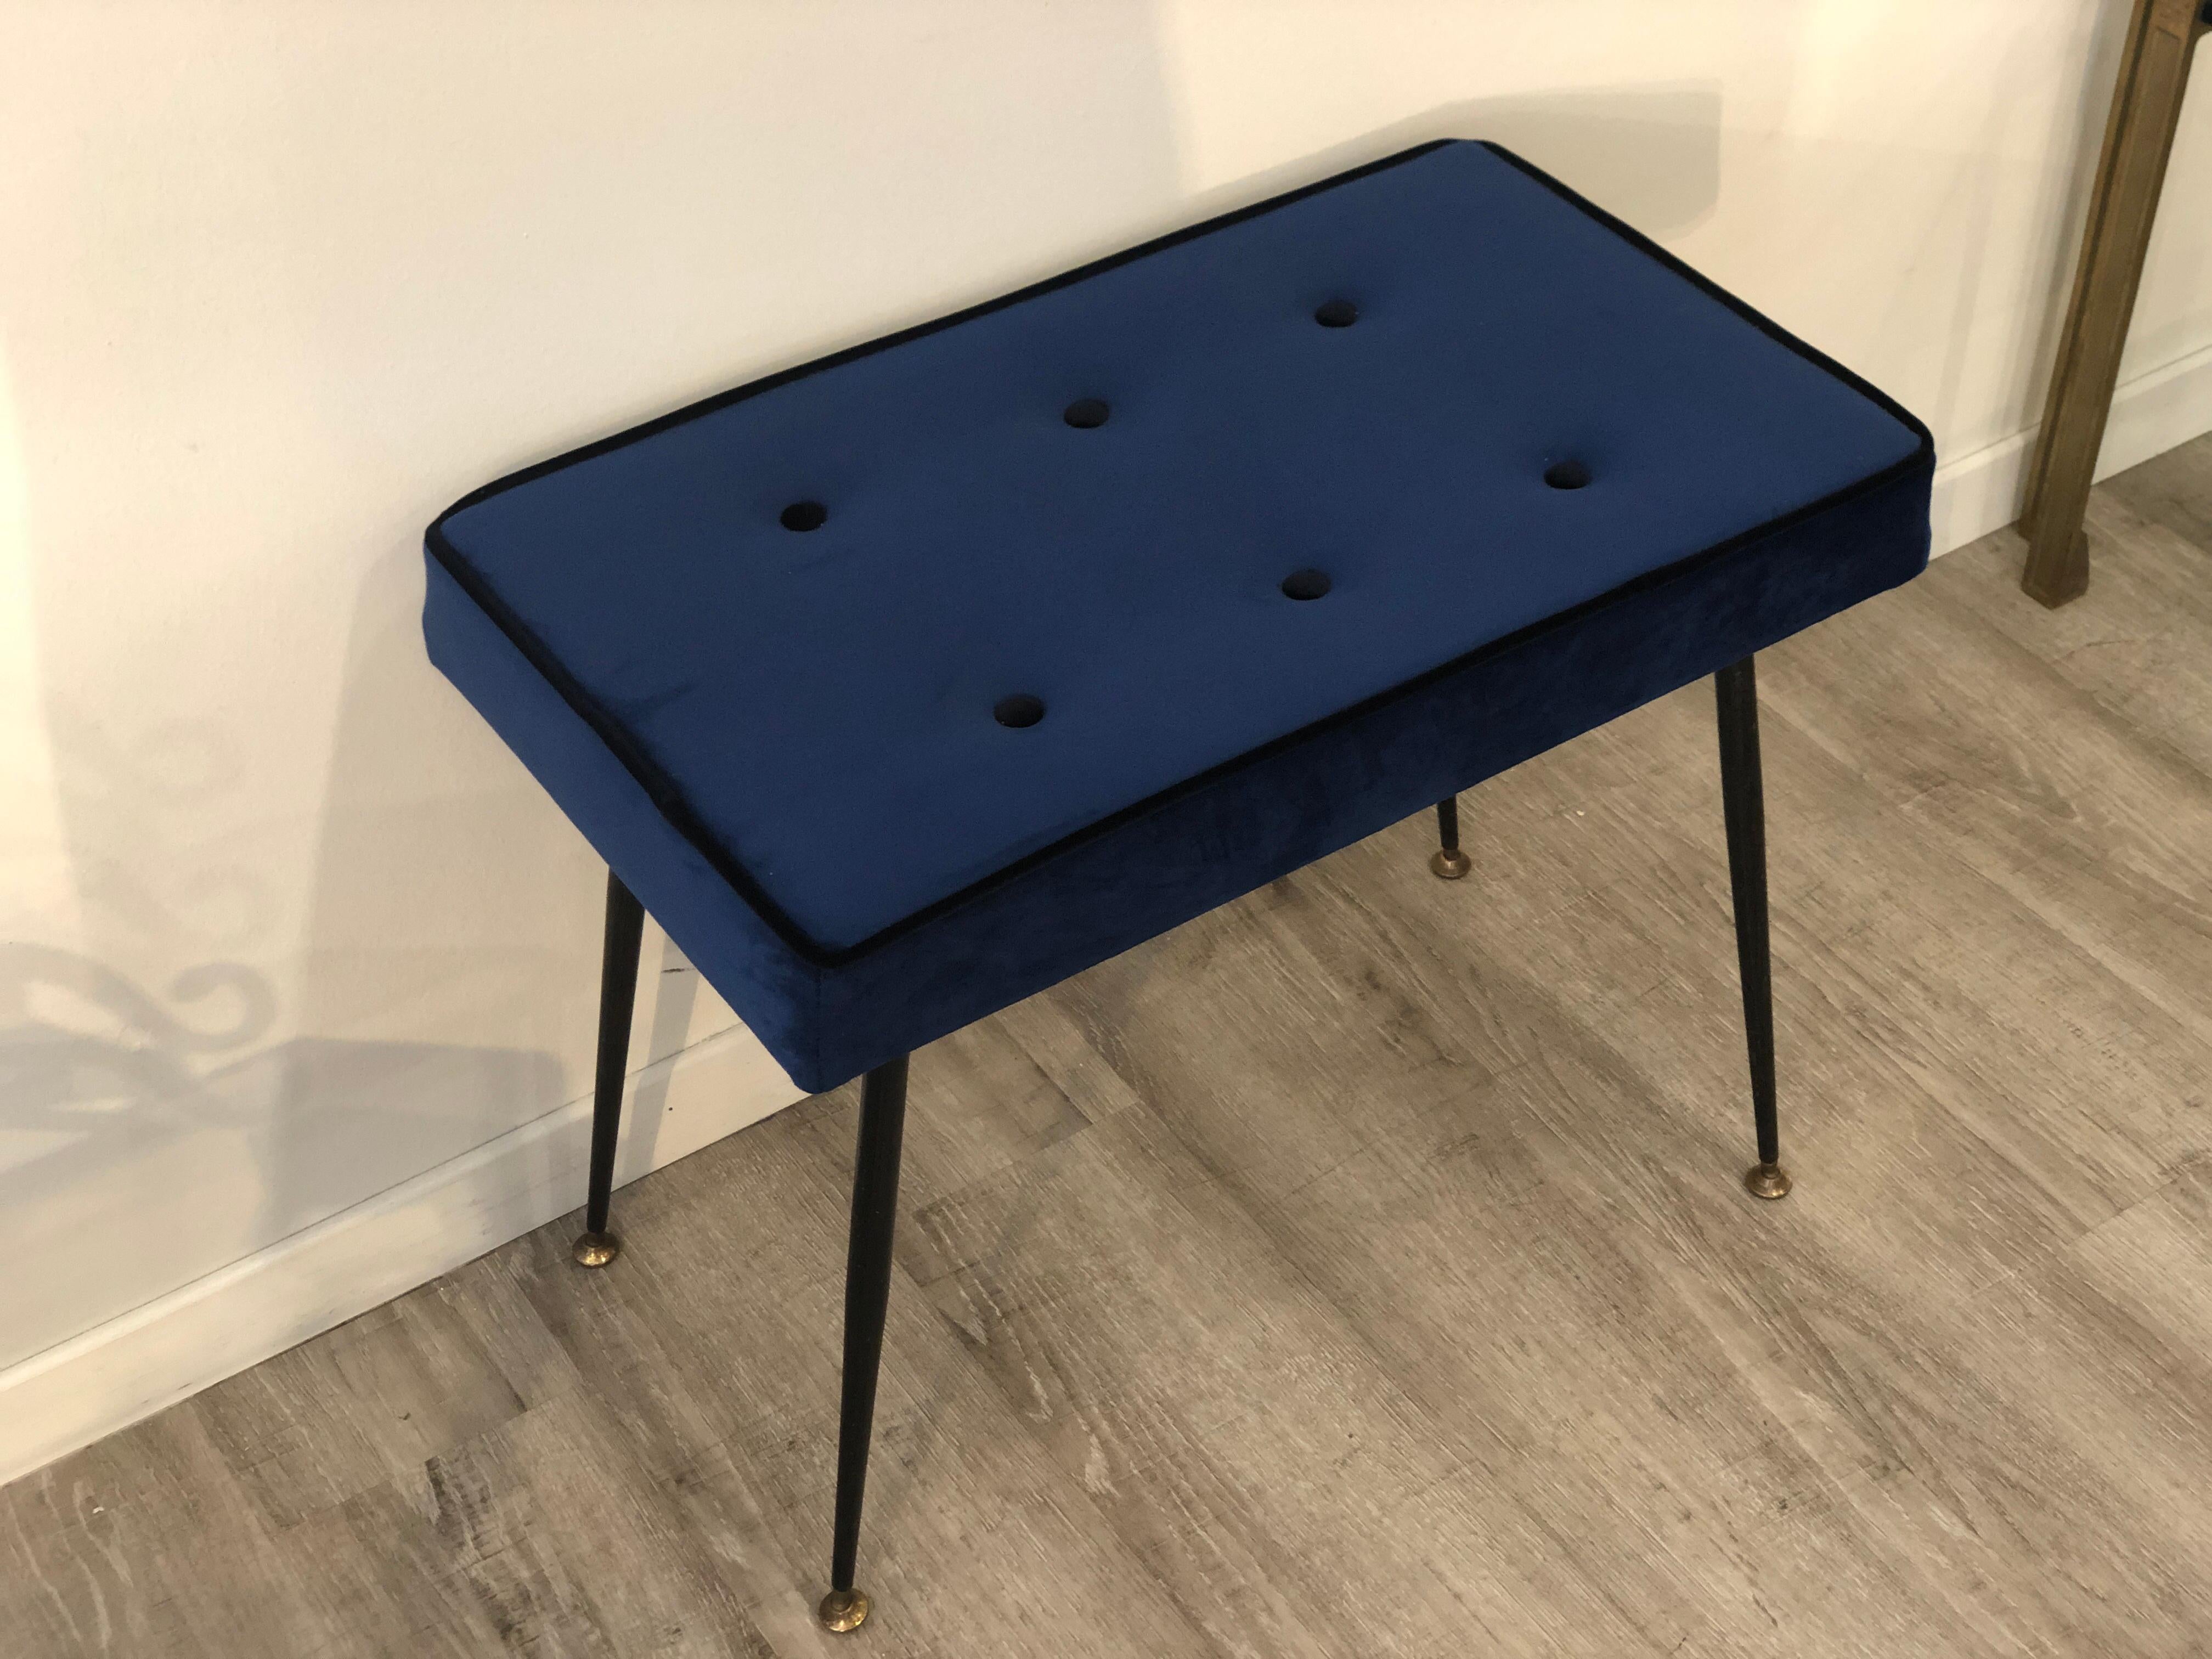 1950s blue velvet black brass ending legs stool. Italian little bench from mid century period. Suitable to be used both as little stool or bench.
We have restored in conservative way the legs, fixing the black lacquer where needed. We have